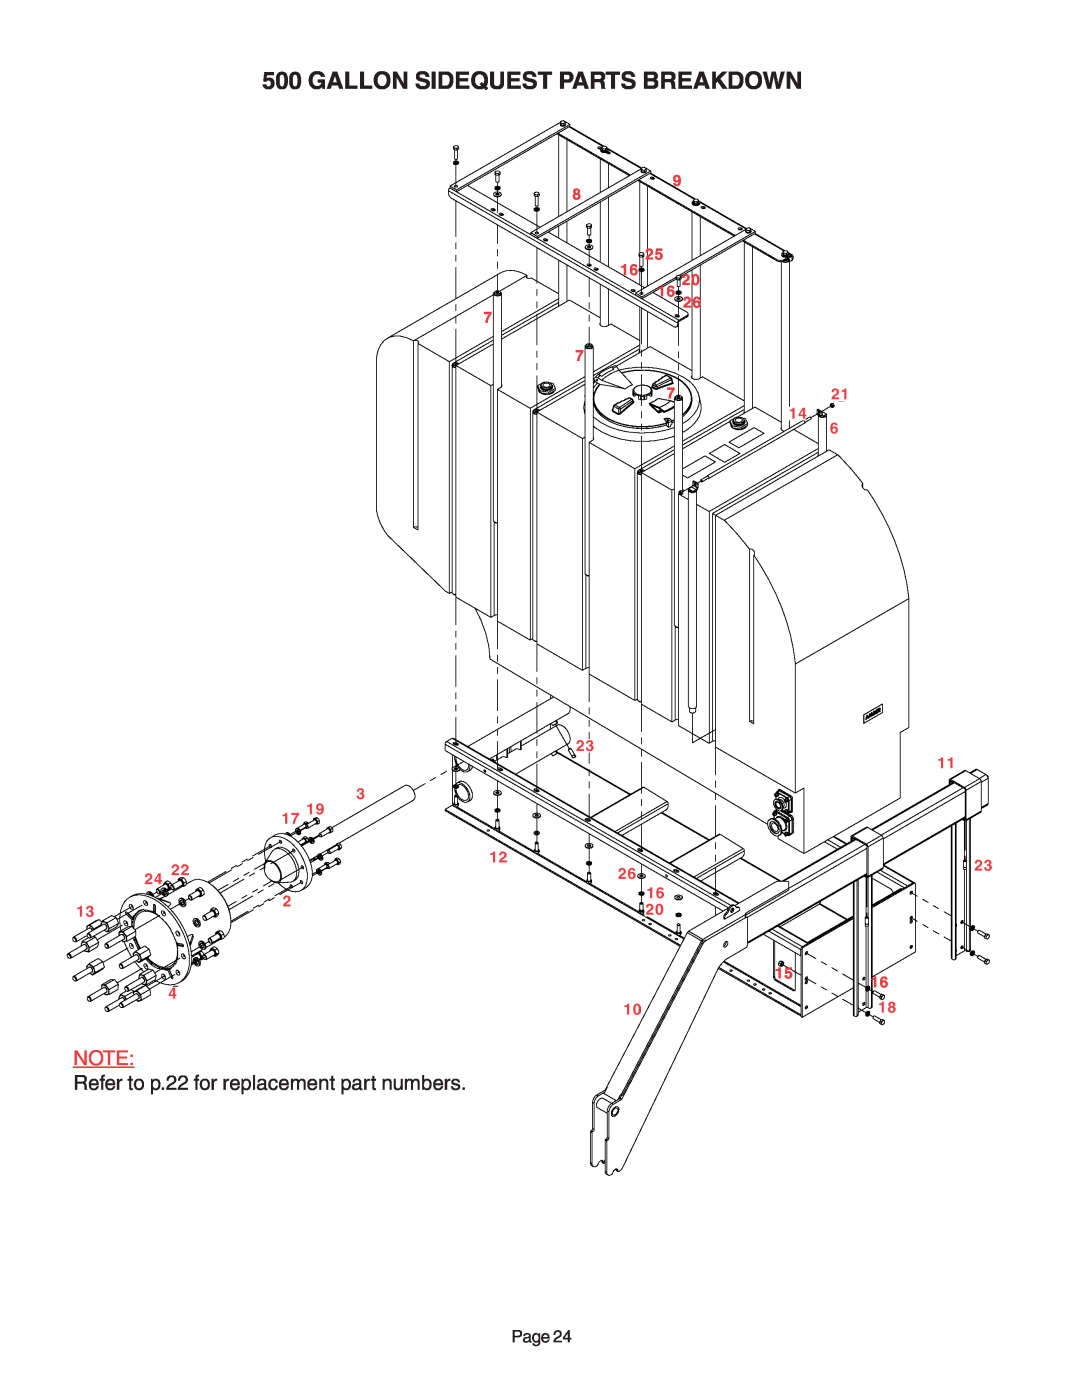 Demco AC20037 manual Gallon Sidequest Parts Breakdown, Refer to p.22 for replacement part numbers, 2012, 1111, 1221 